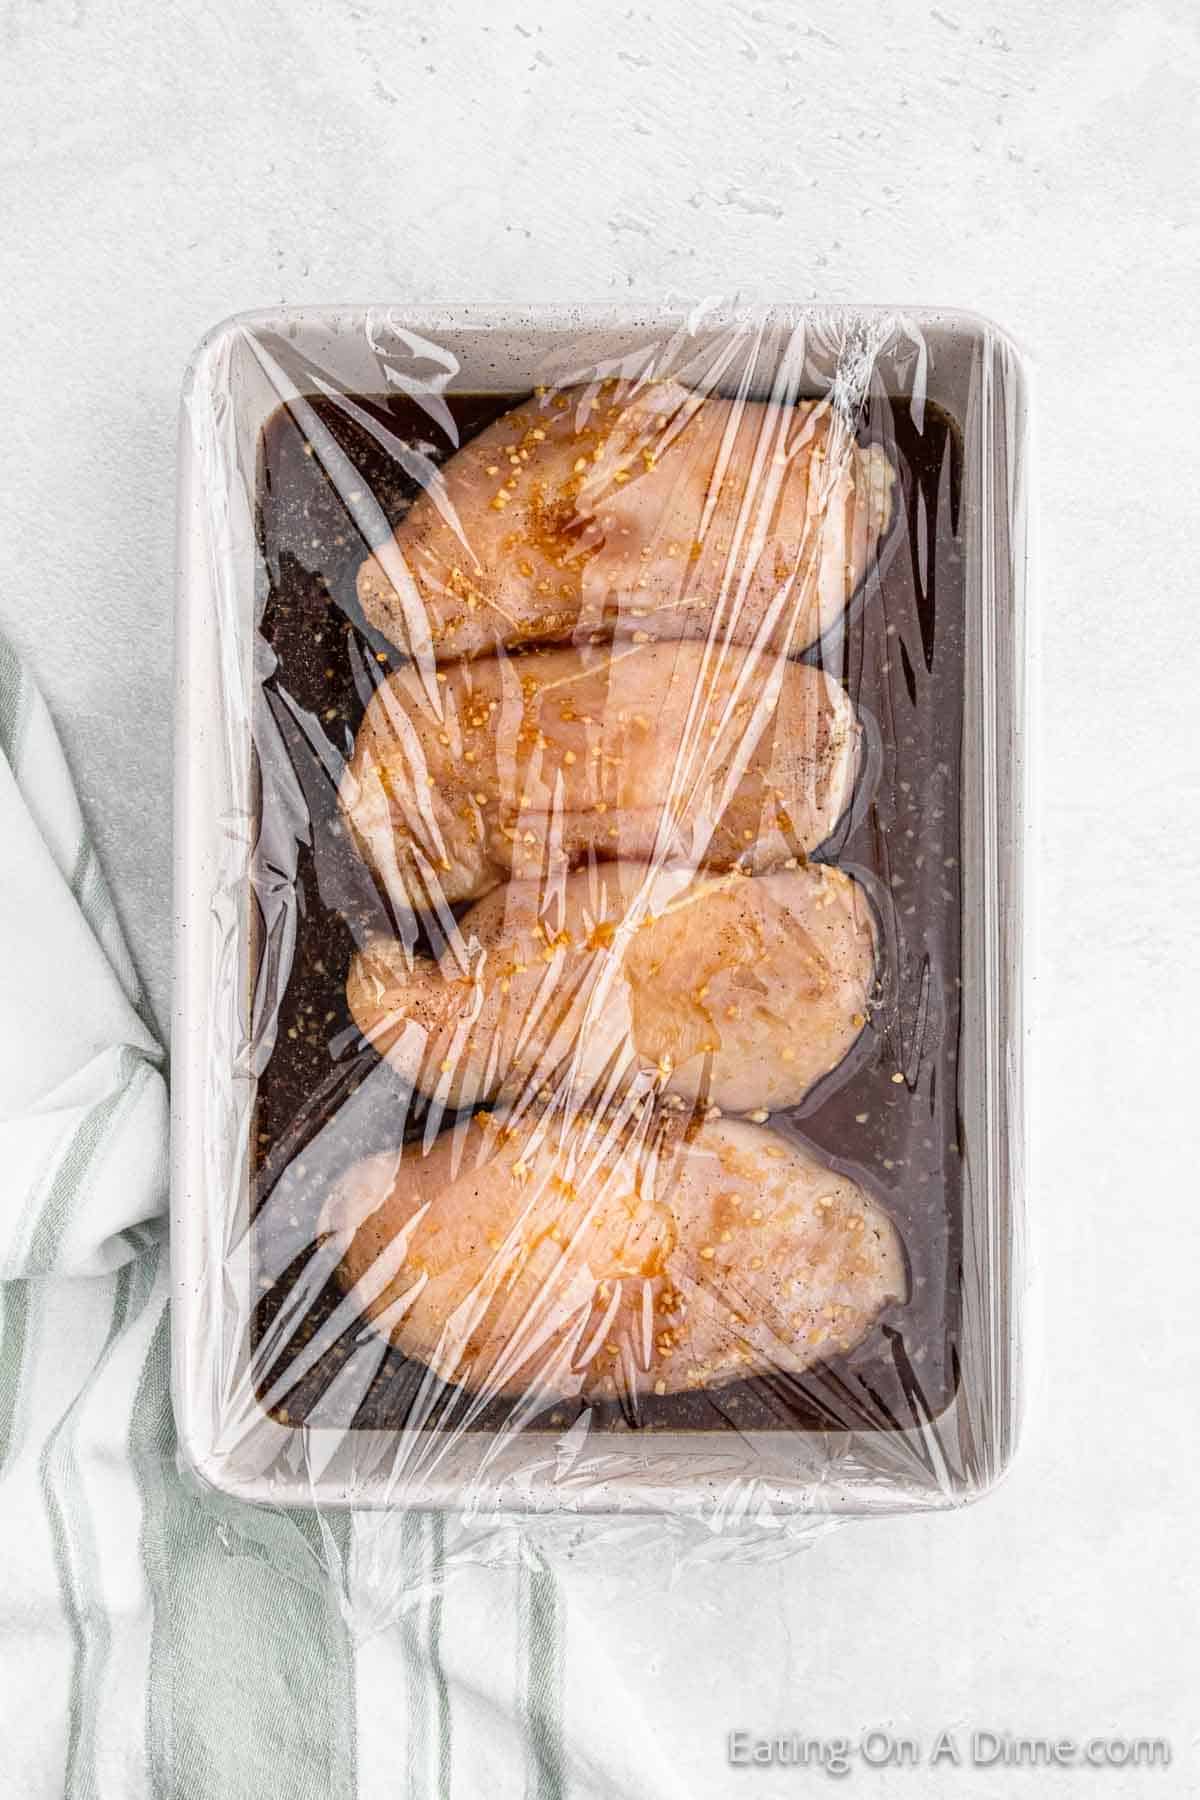 Placing chicken breast in a baking dish with the marinade covered with a plastic wrap